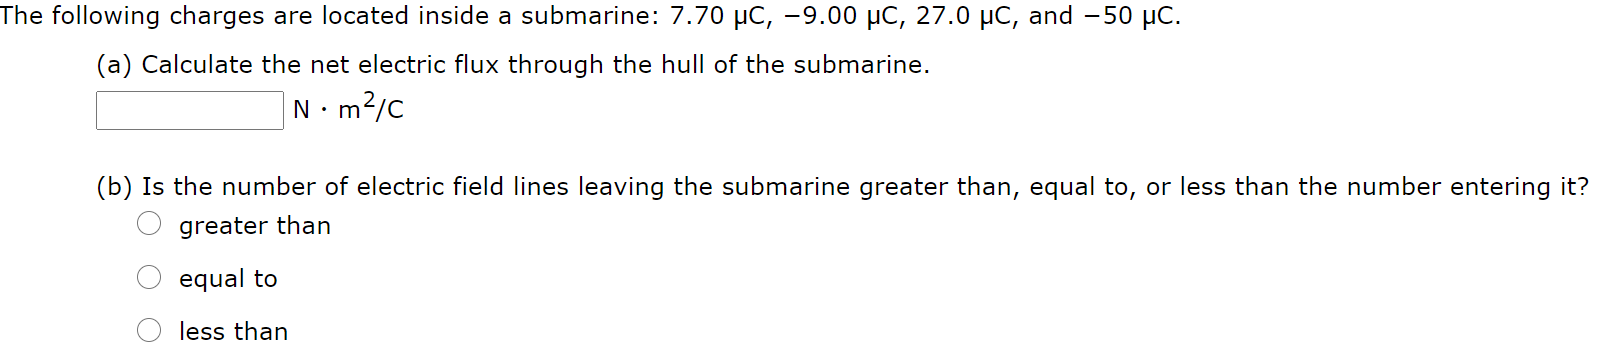 The following charges are located inside a submarine: 7.70 µC, -9.00 µC, 27.0 µC, and - 50 µC.
(a) Calculate the net electric flux through the hull of the submarine.
N•m?/c
(b) Is the number of electric field lines leaving the submarine greater than, equal to, or less than the number entering it?
greater than
equal to
less than
